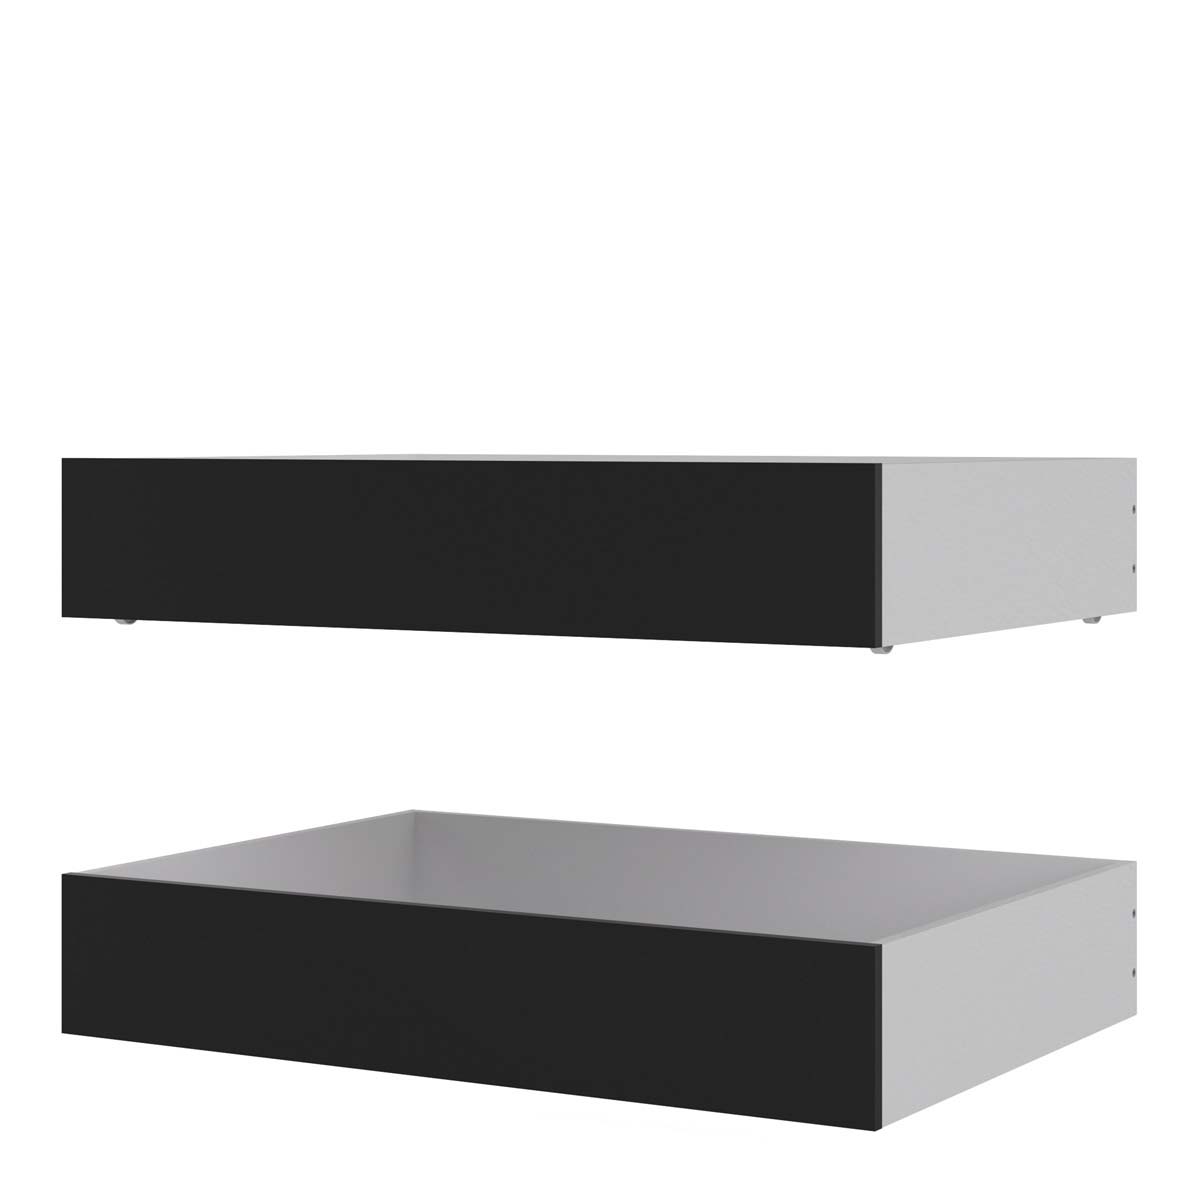 Naia Set of 2 Underbed Drawers (for Single or Double beds) in Black Matt_